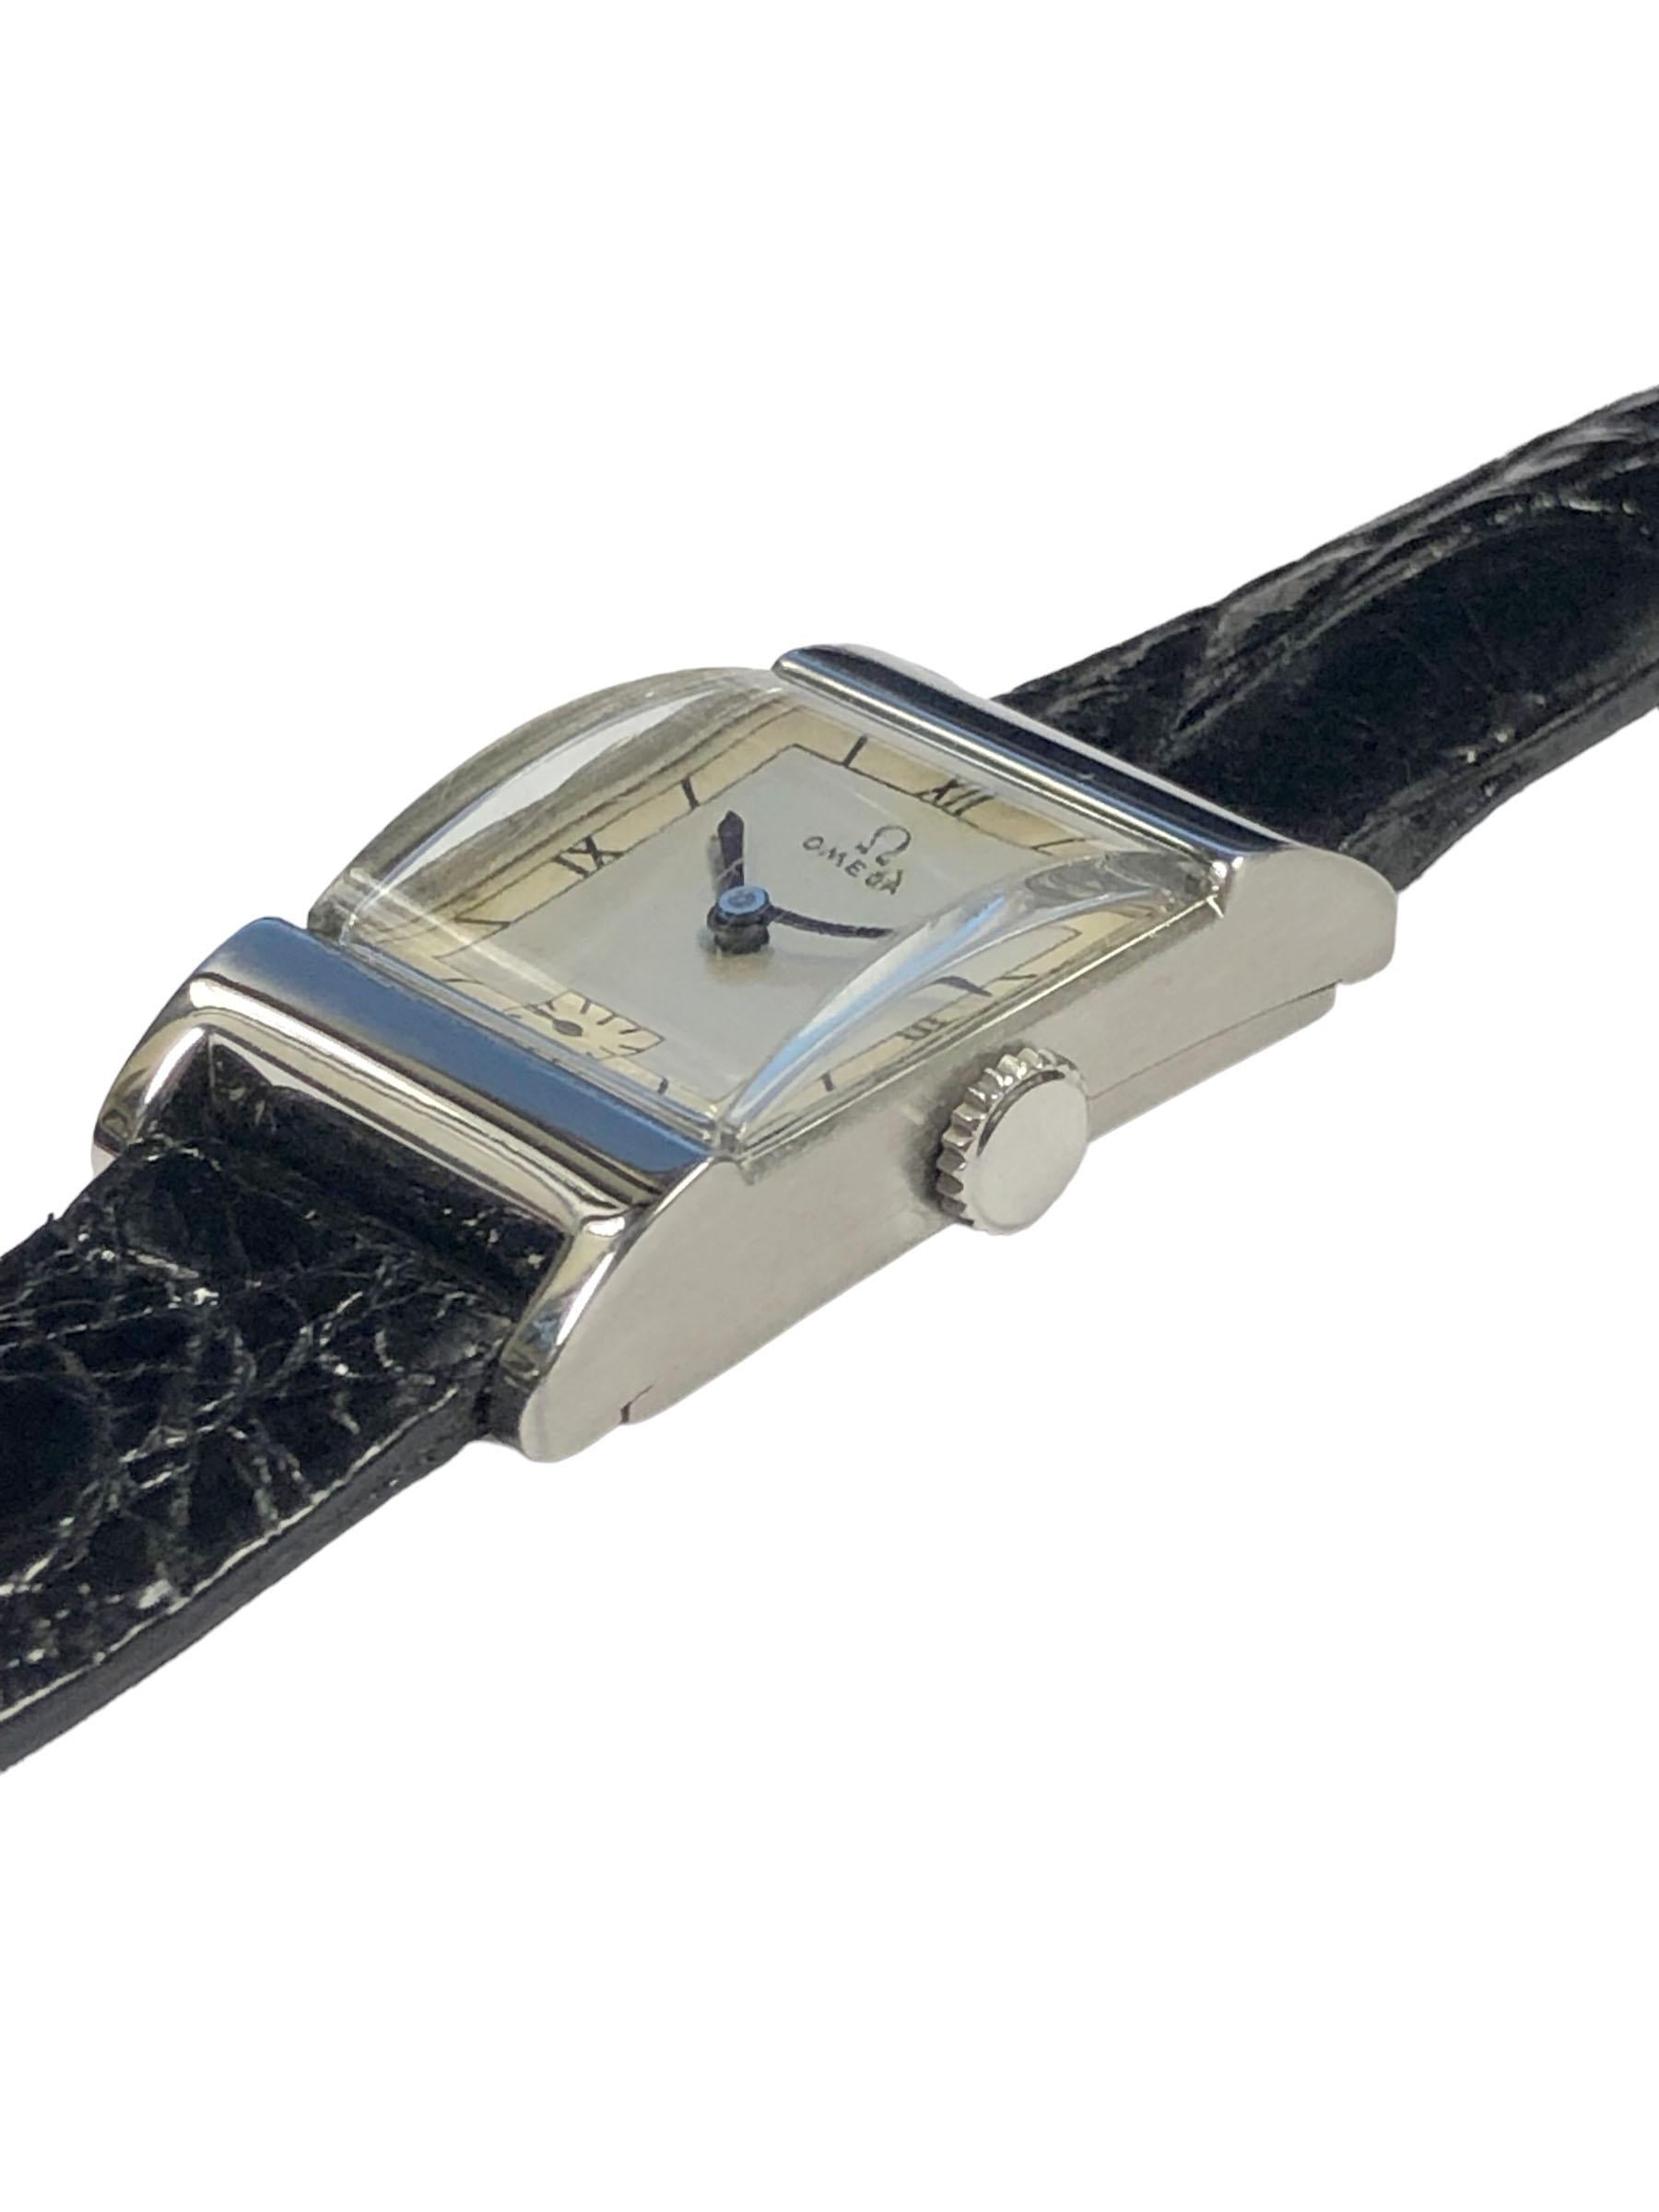 Circa Late 1930s Omega Wrist watch, 36 X 20 M.M. 2 Piece Stainless Steel signed Omega case, 17 Jewel Mechanical, Manual Wind Nickle Lever Movement, original near mint 2 tone Silver Satin Dial. Original Thick Curved Glass Crystal, New Black Alligator